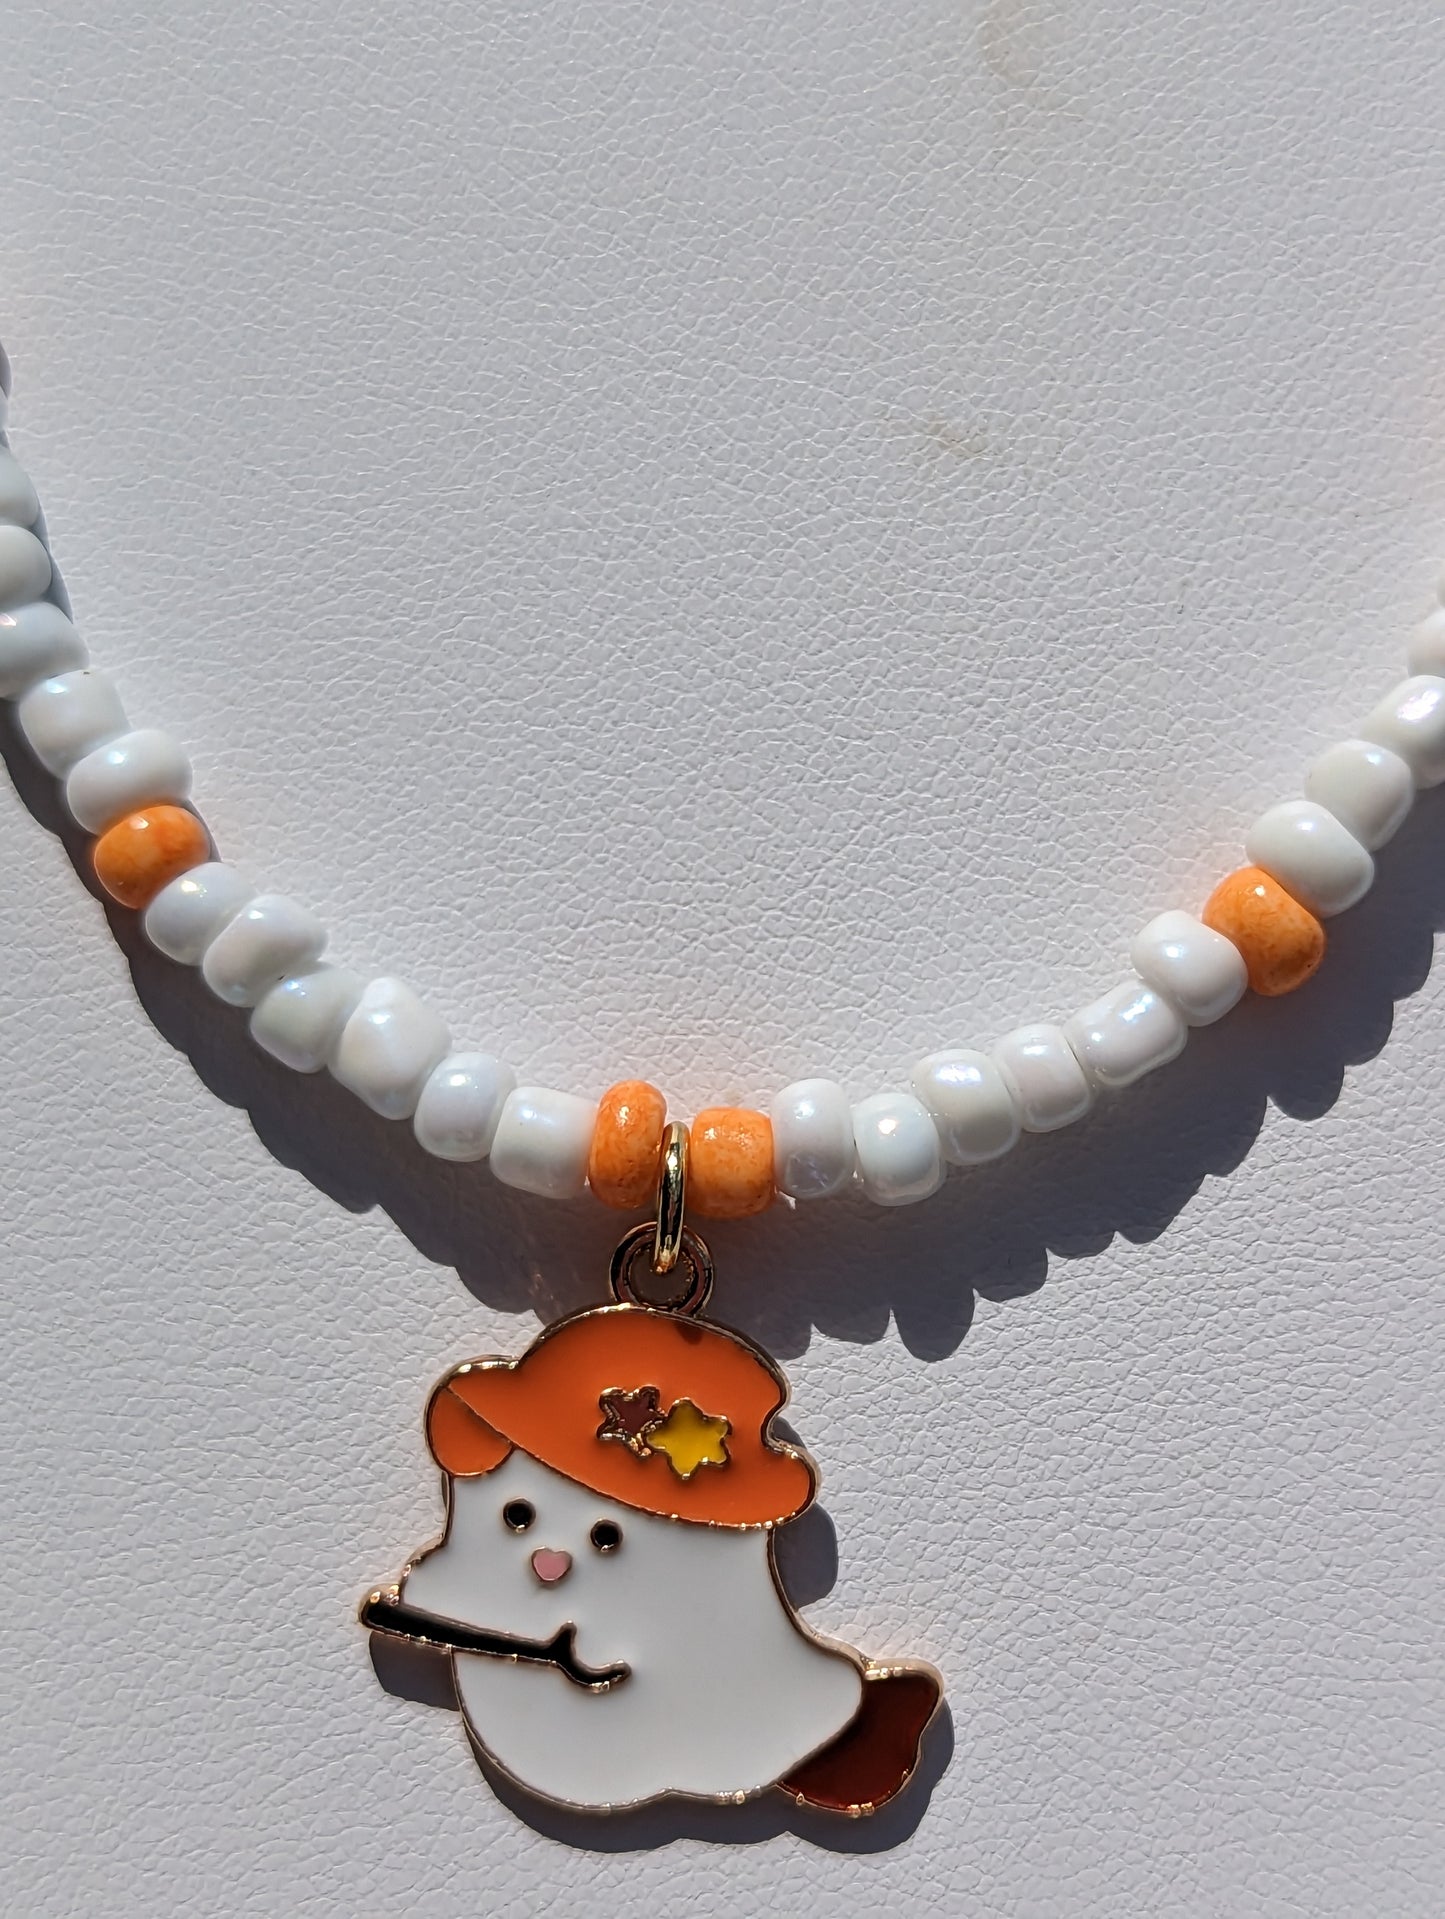 Friendly Ghost Charm on Beaded Necklace